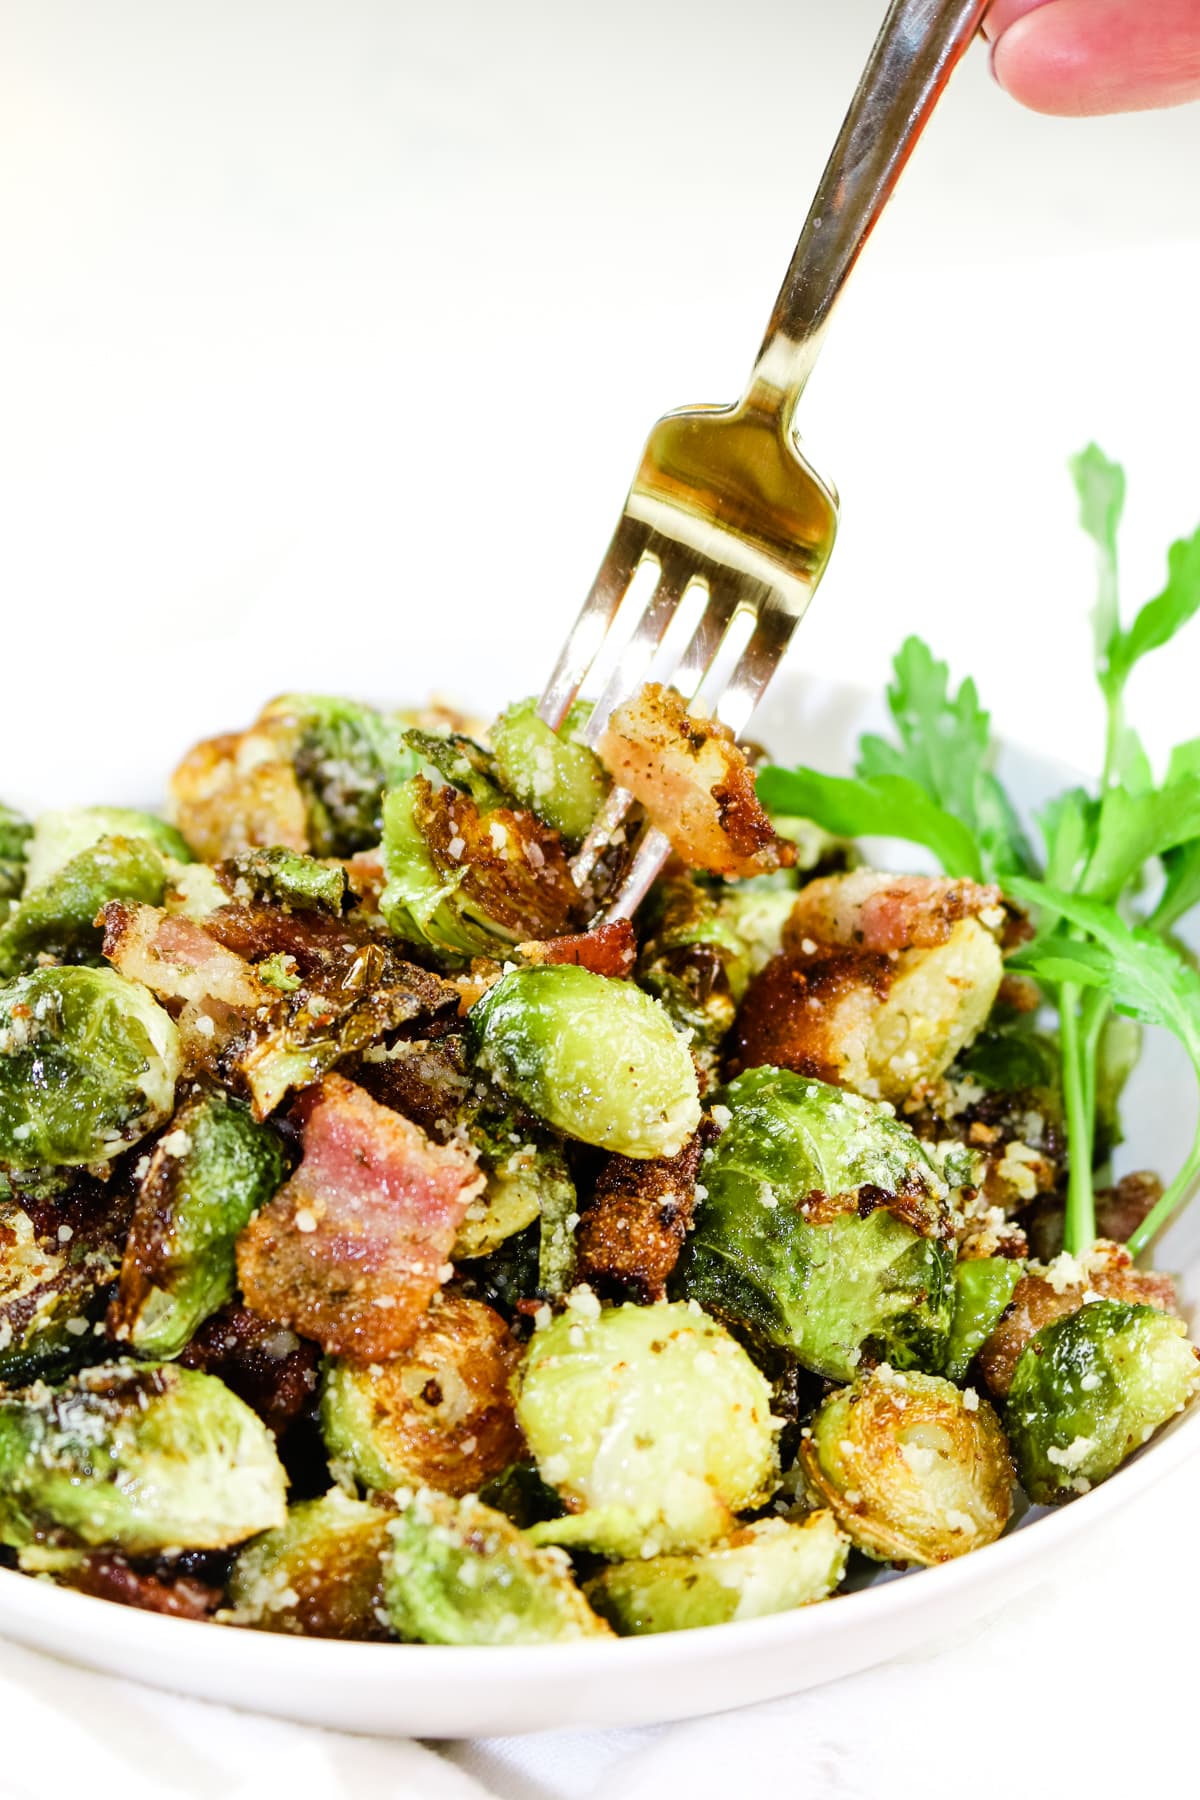 Roasted Brussels sprouts with bacon and parmesan cheese